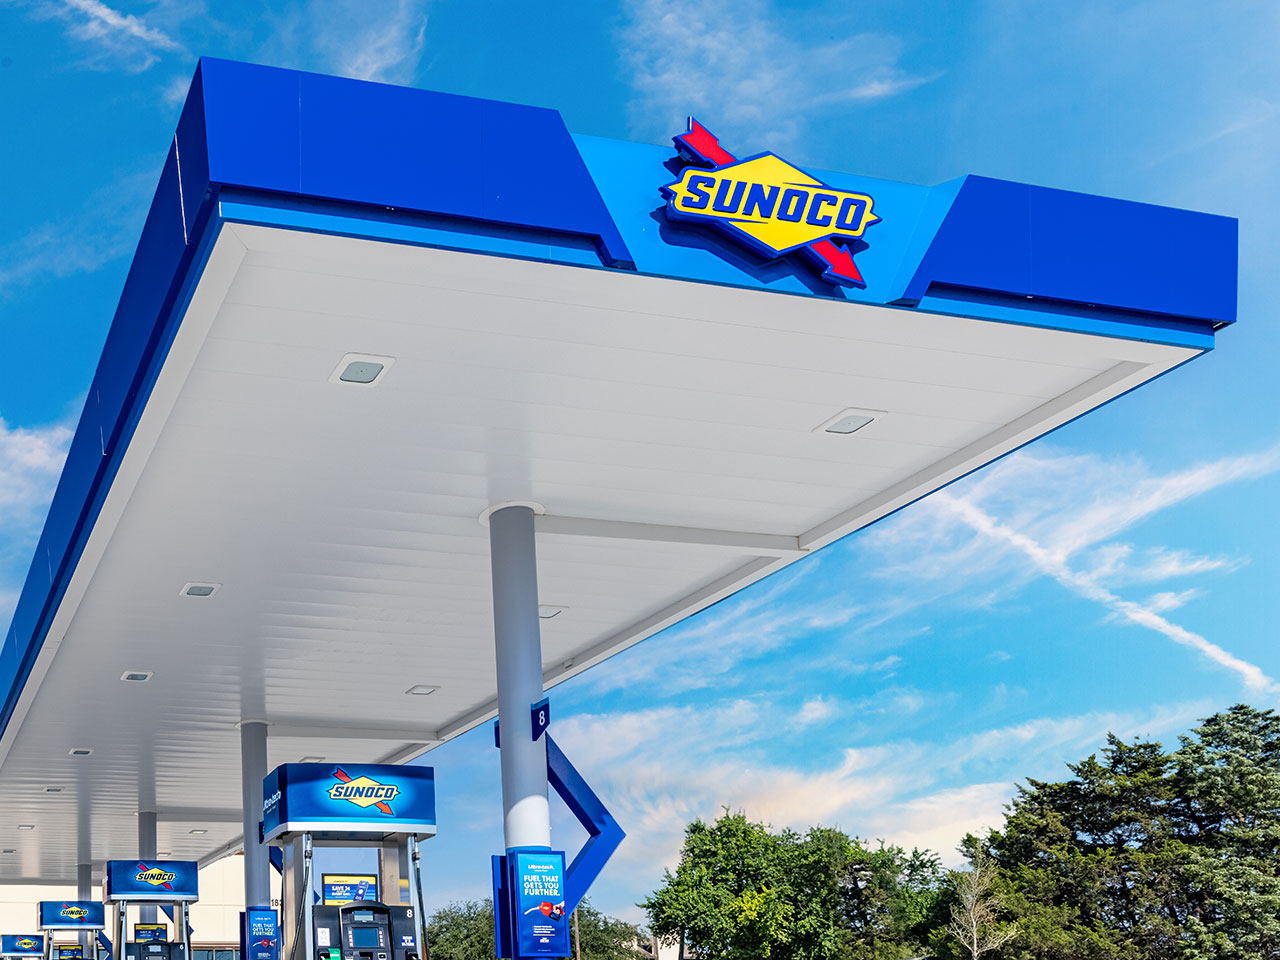 Sunoco signage at Sunoco branded fuel station